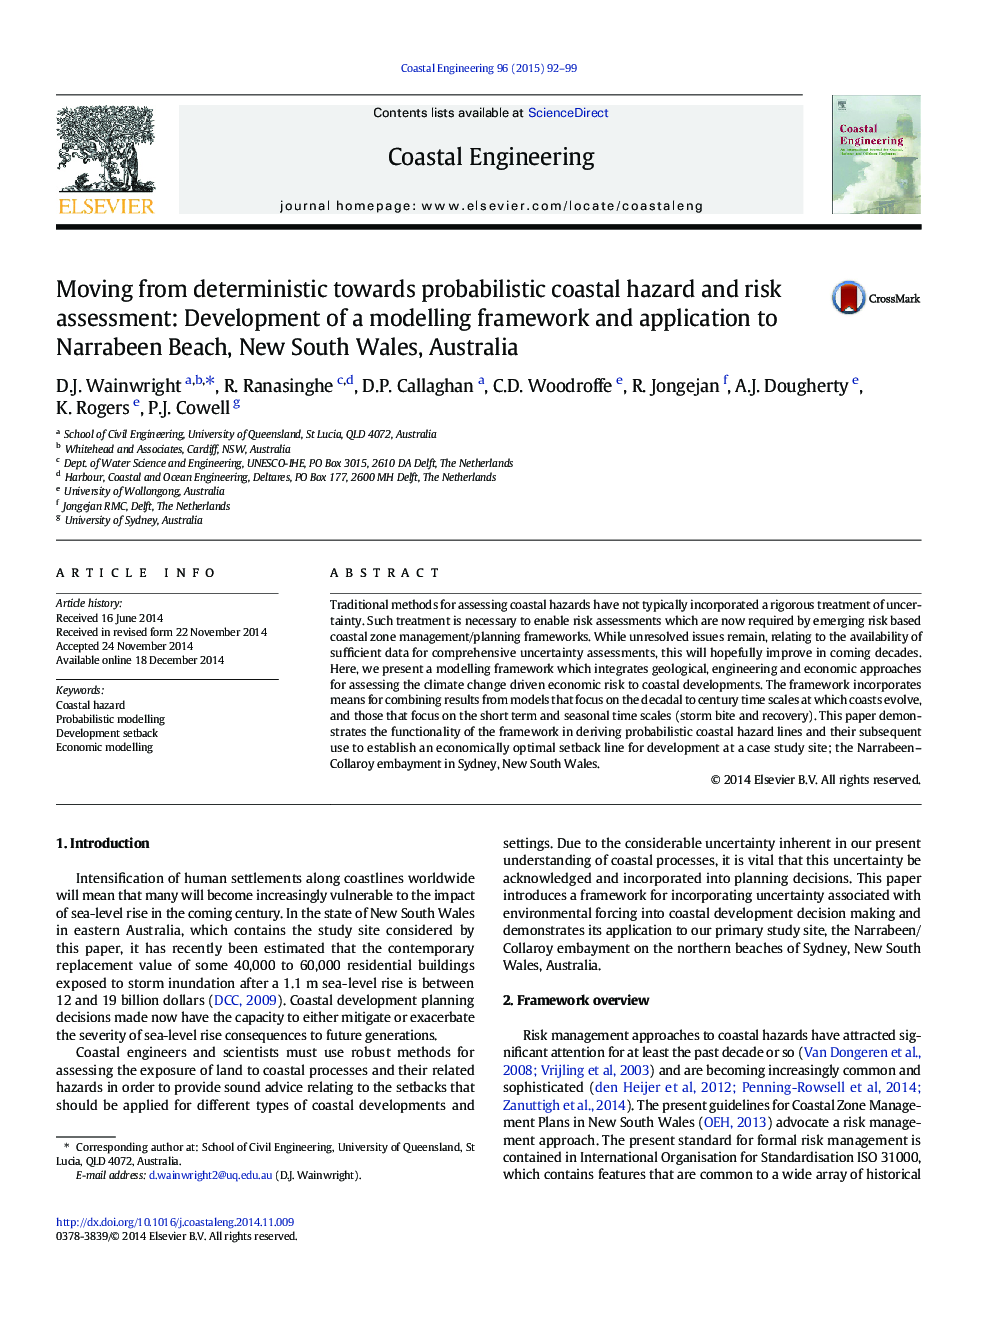 Moving from deterministic towards probabilistic coastal hazard and risk assessment: Development of a modelling framework and application to Narrabeen Beach, New South Wales, Australia